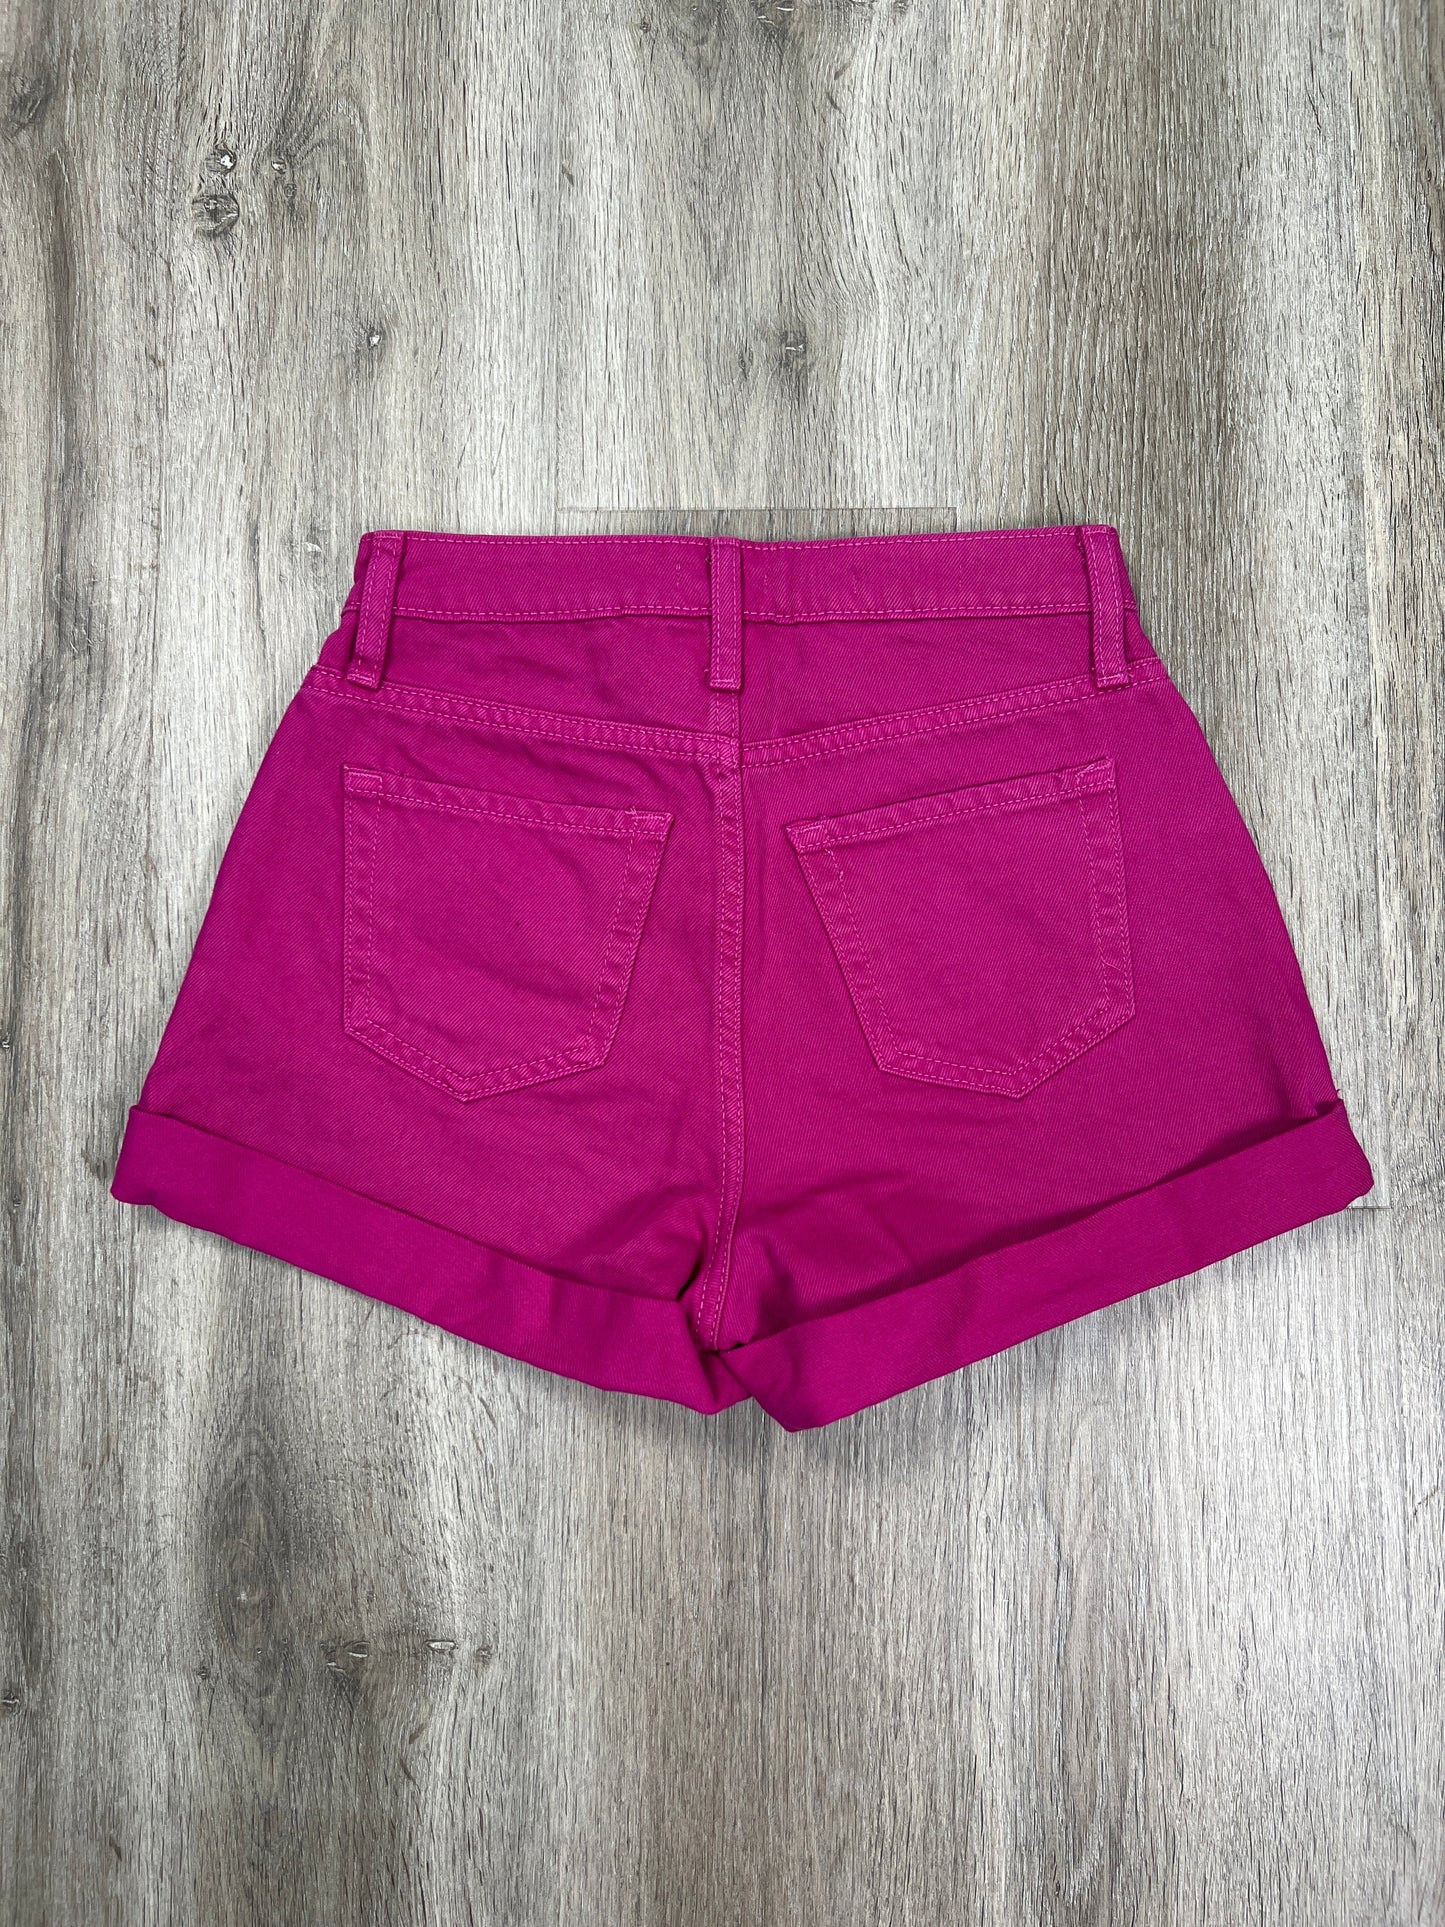 Shorts By Wild Fable  Size: Xs